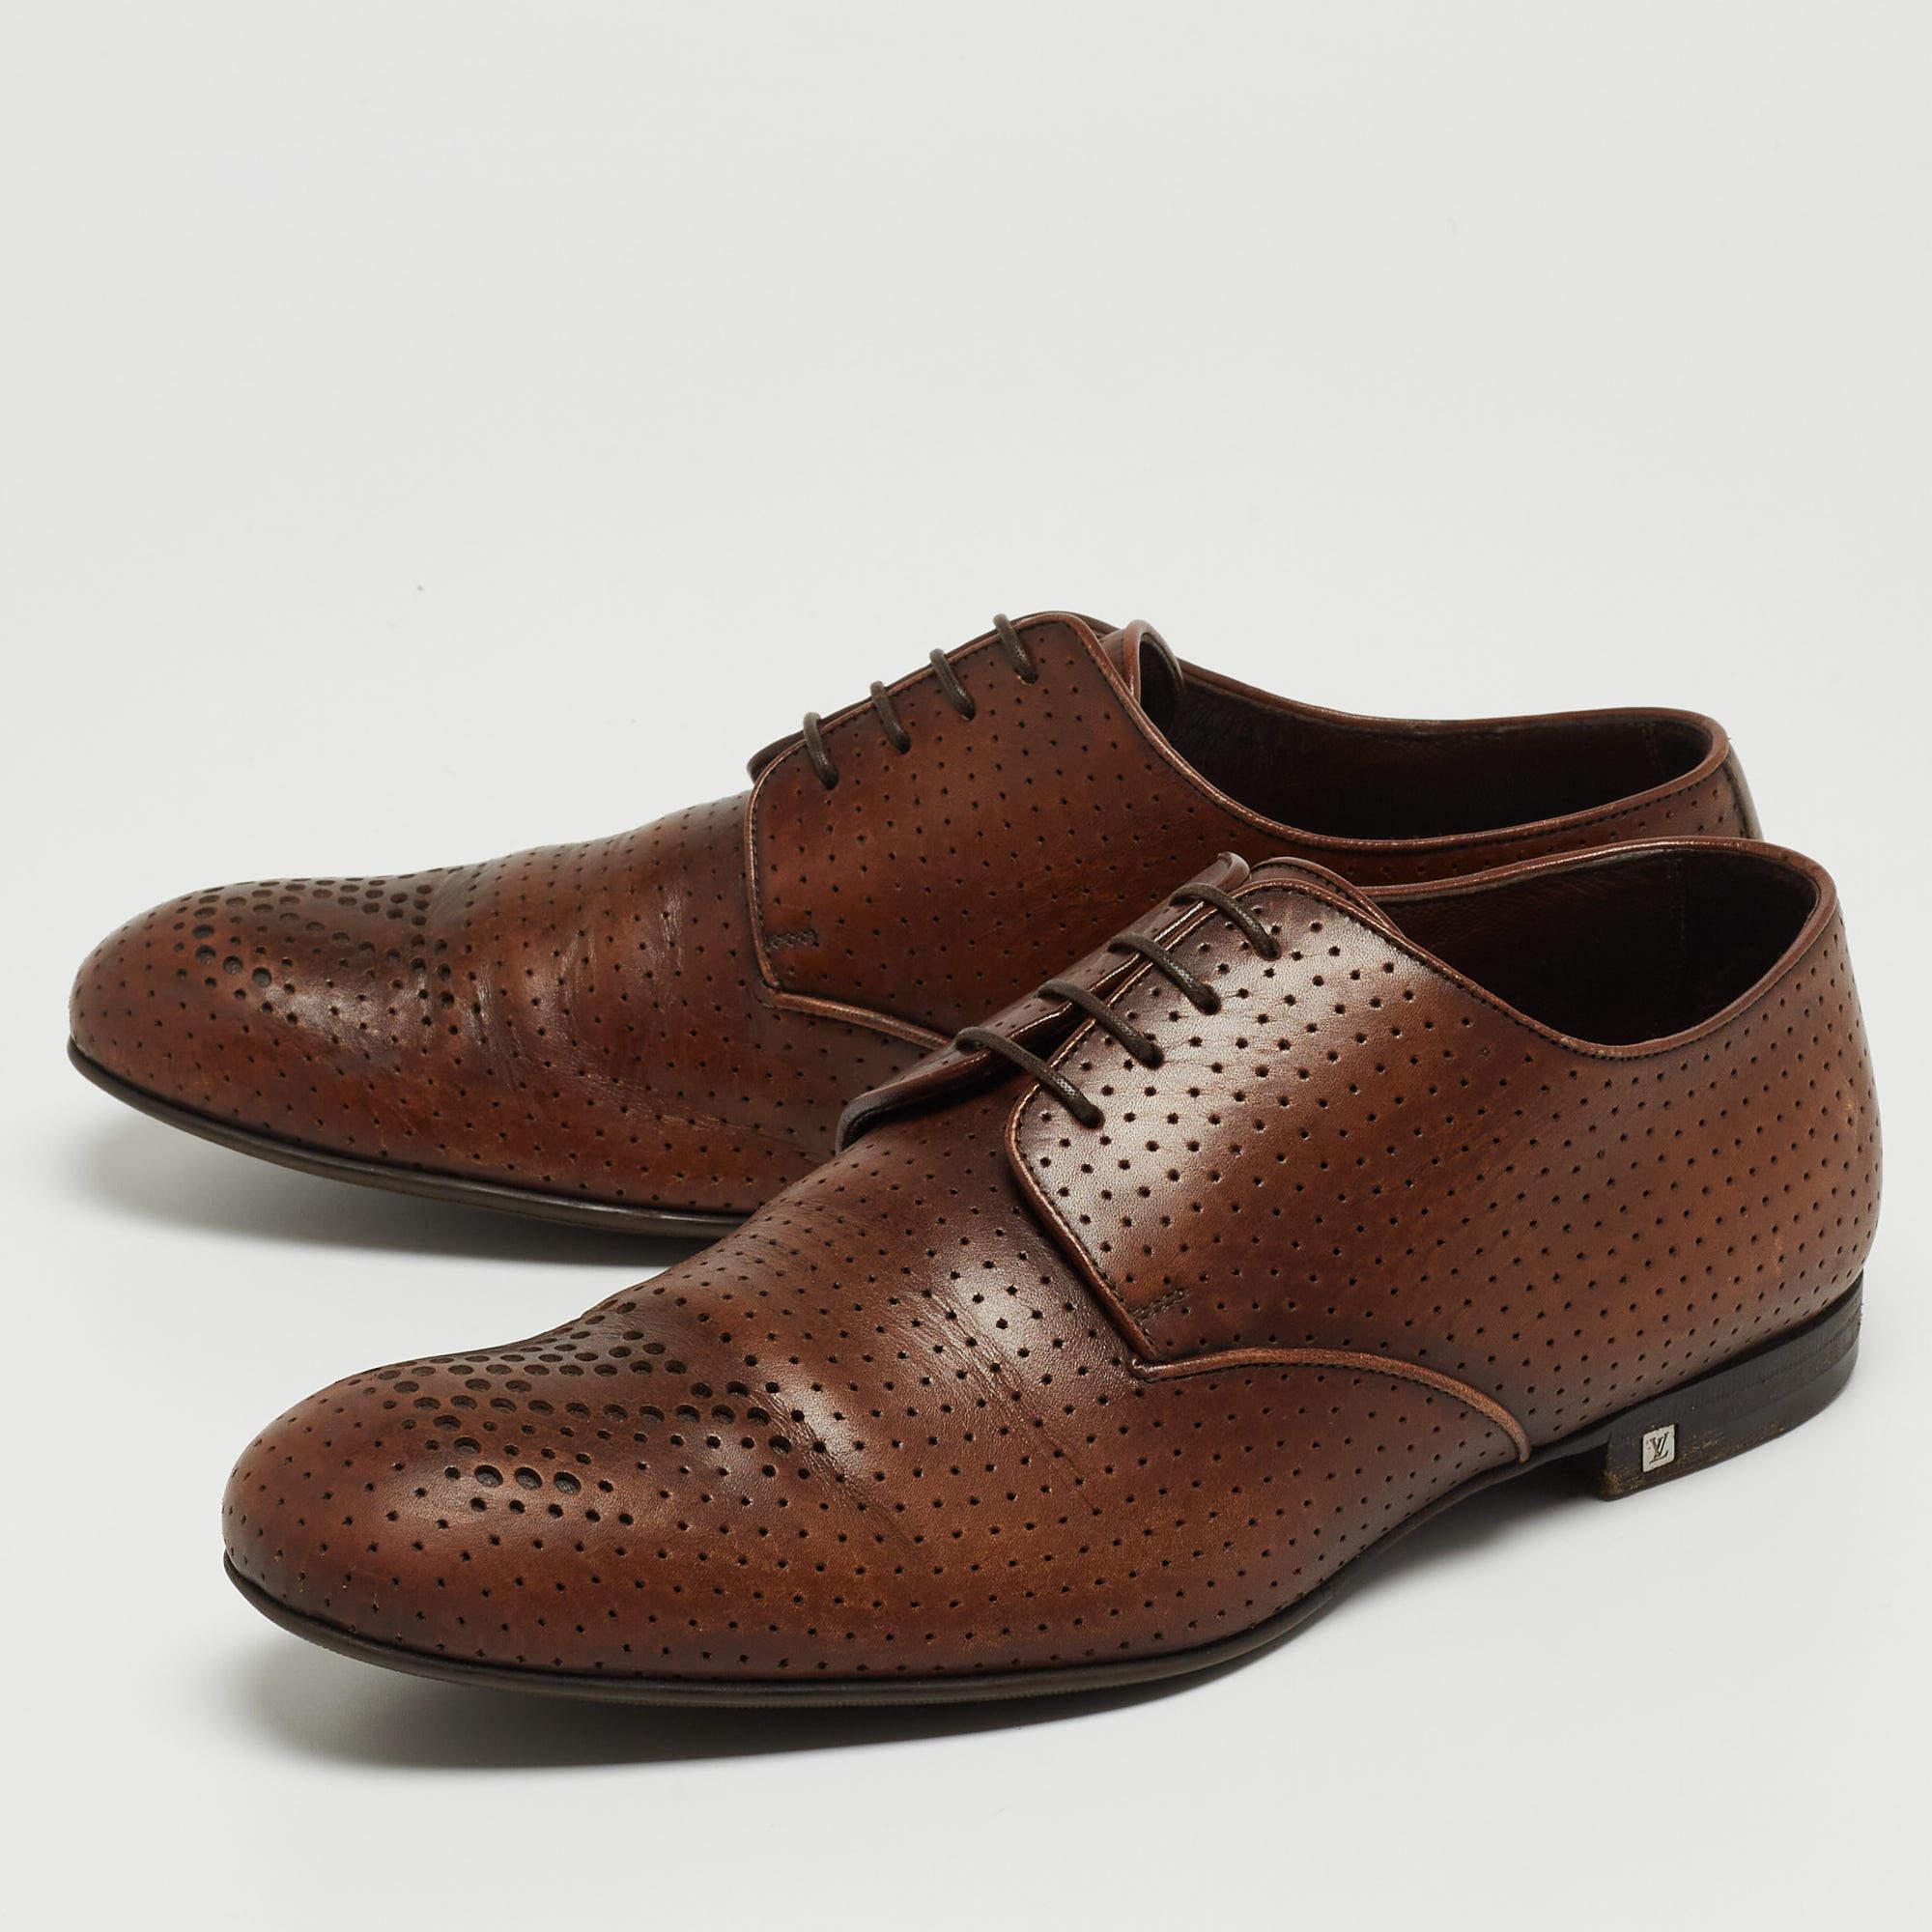 These Louis Vuitton derby shoes aim to deliver a fashionable result. Constructed using brown perforated leather and secured with laces, these shoes are as durable as they are appealing.

